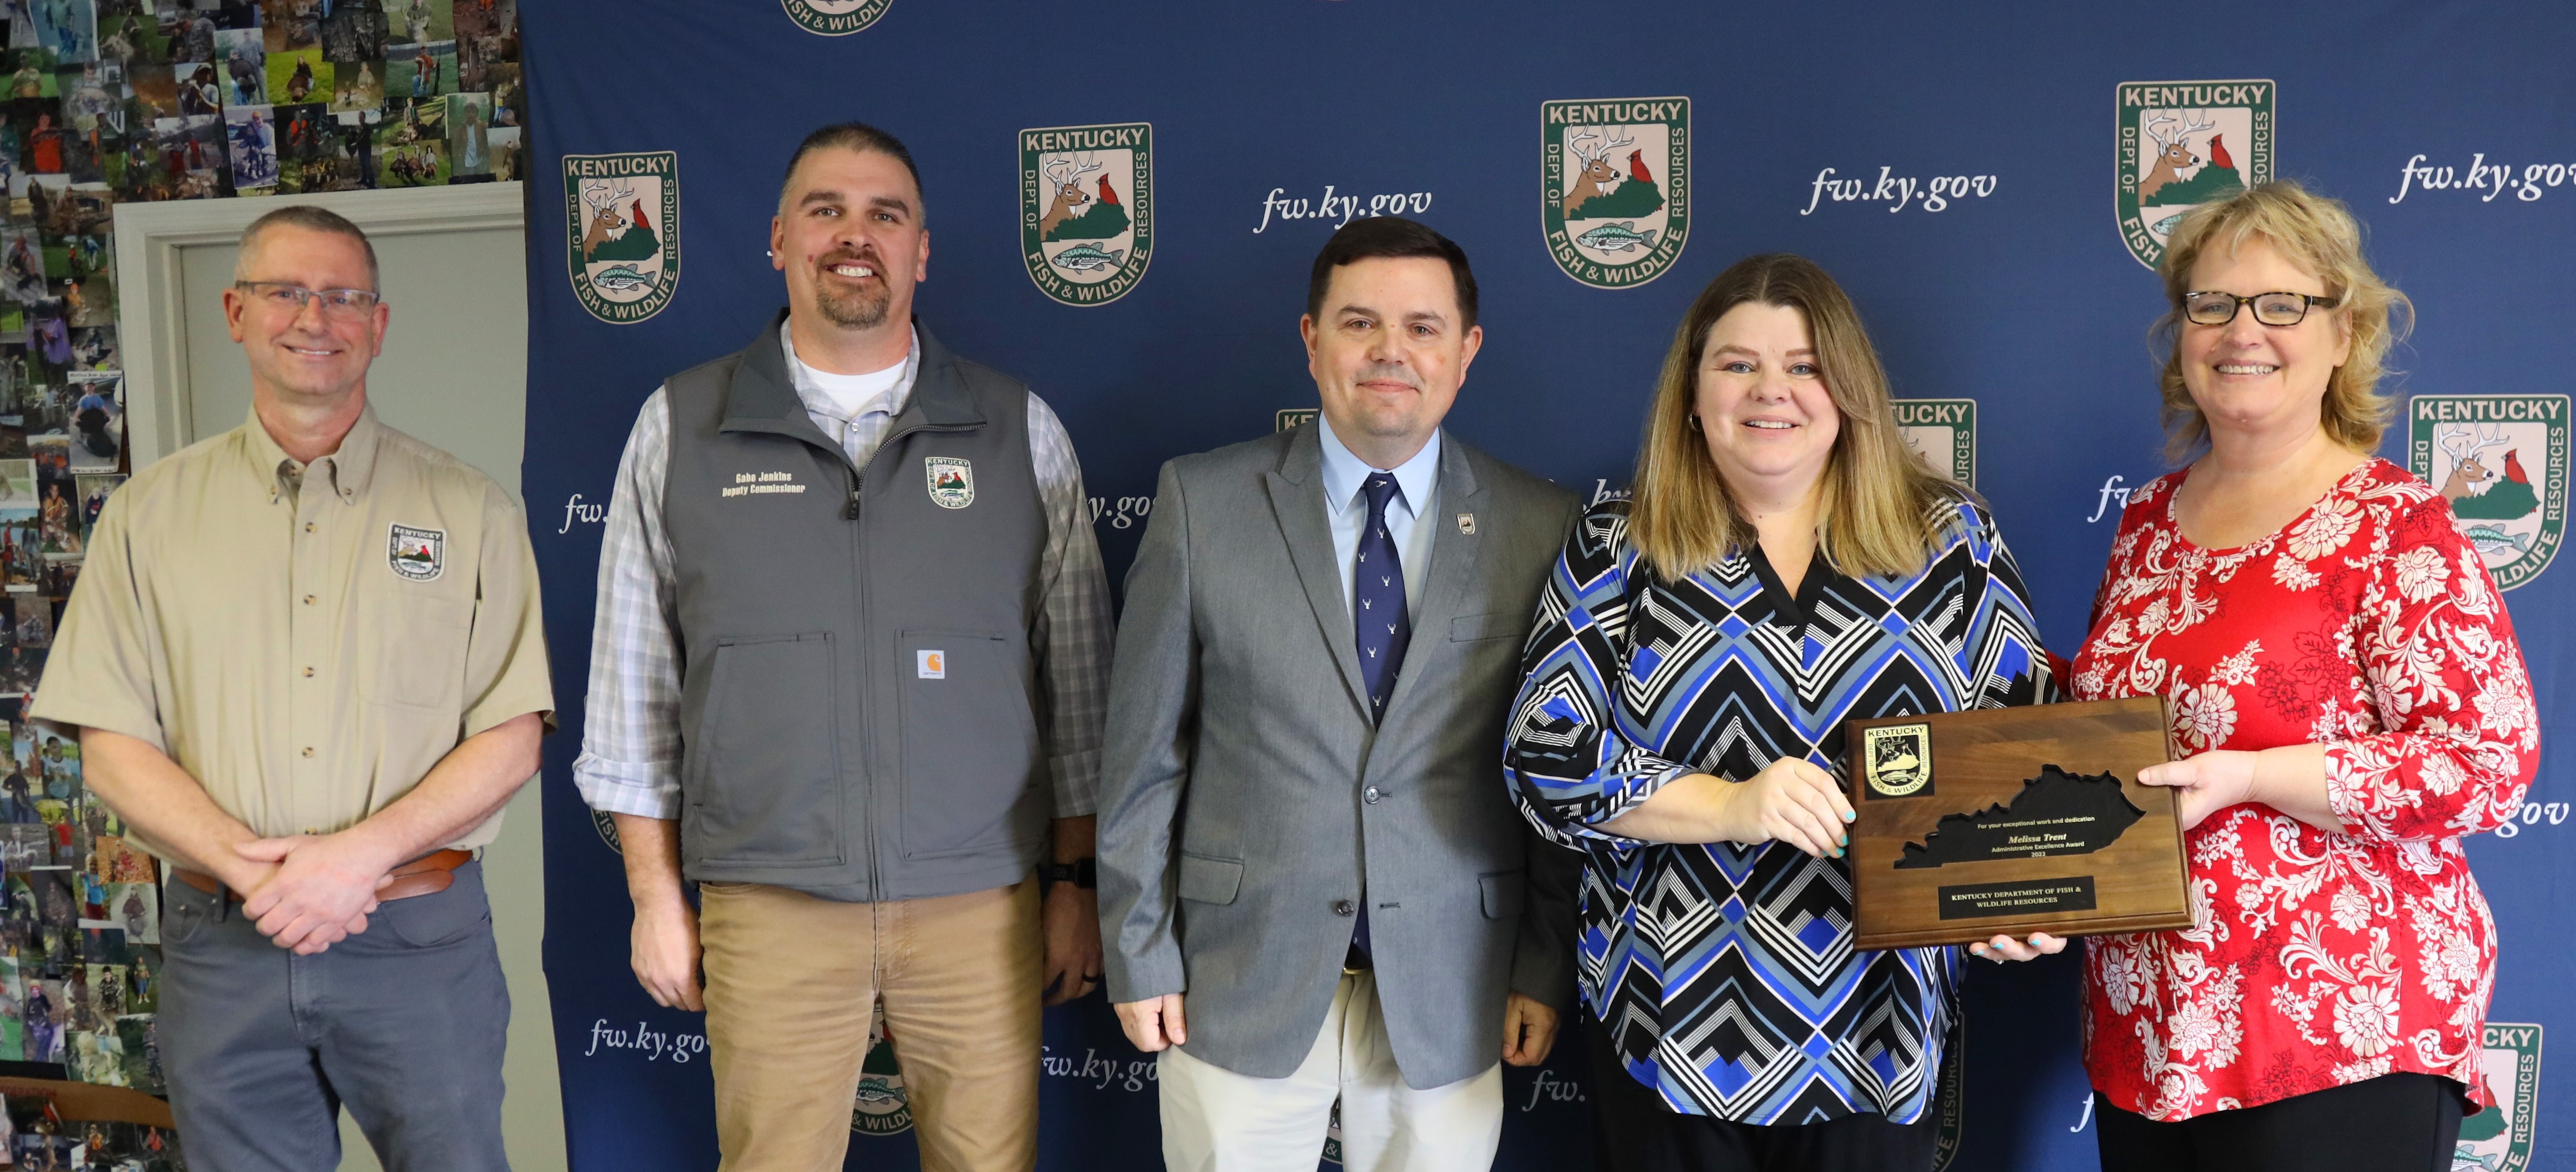 Photograph showing a group of three men and two women smiling for the camera. Pictured left to right, Deputy Commissioners Brian Clark and Gabe Jenkins, Commissioner Rich Storm, Melissa Trent, Administrative Services Division Director Lisa Cox.